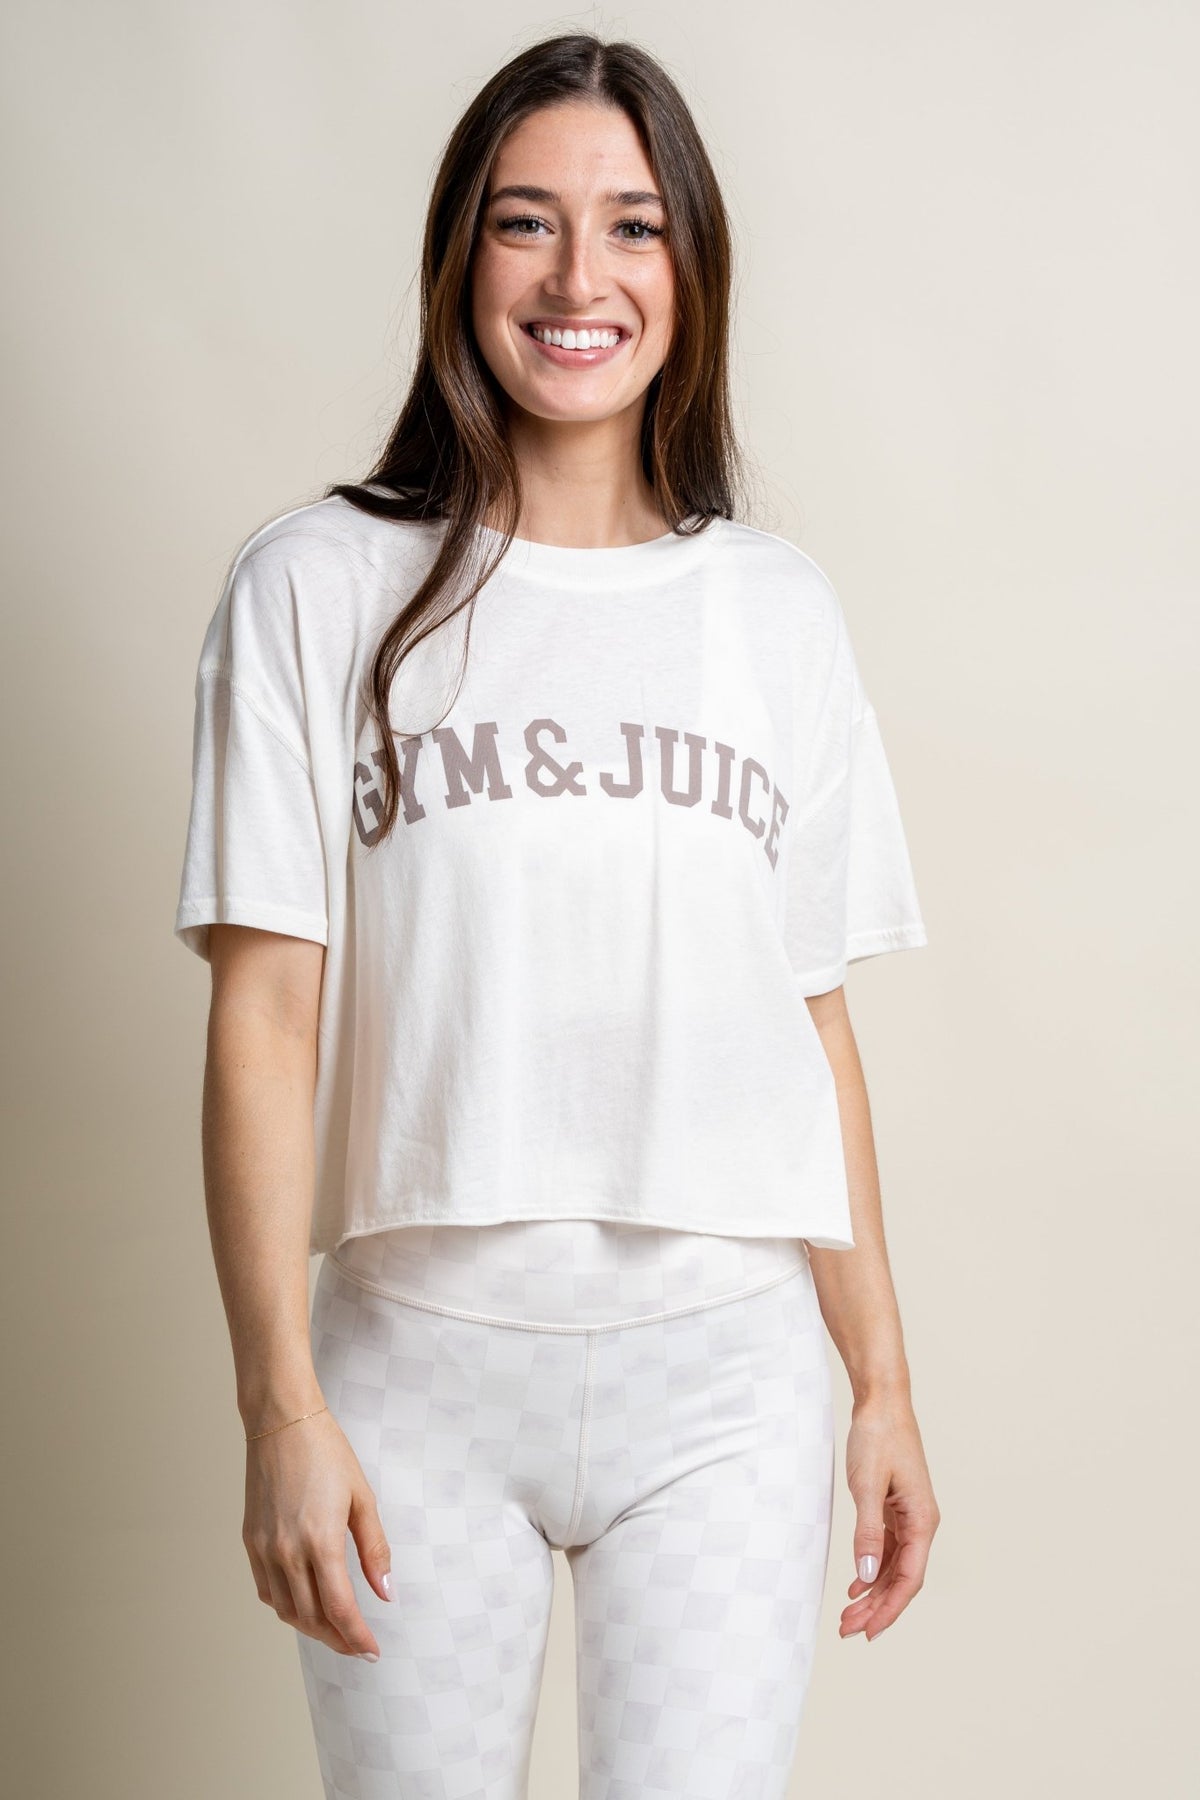 Z Supply vintage gym tee sandstone - Z Supply t-shirt - Z Supply Tops, Dresses, Tanks, Tees, Cardigans, Joggers and Loungewear at Lush Fashion Lounge